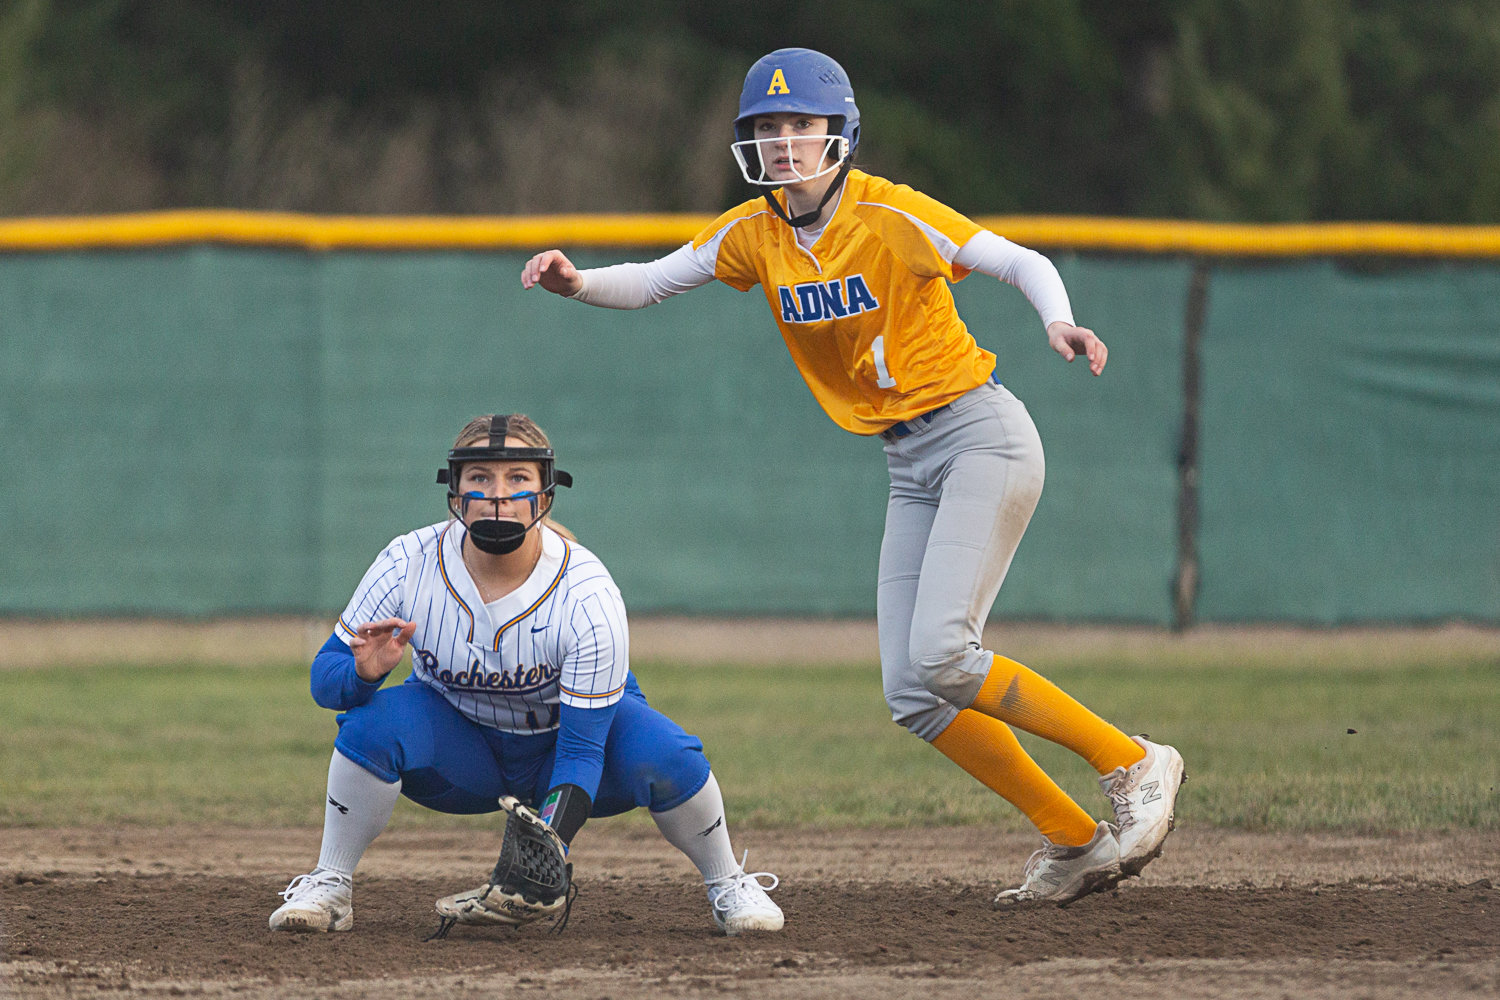 Adna catcher Brooklyn Loose (right) Rochester first baseman Kaylei Clark get ready before a pitch March 15.